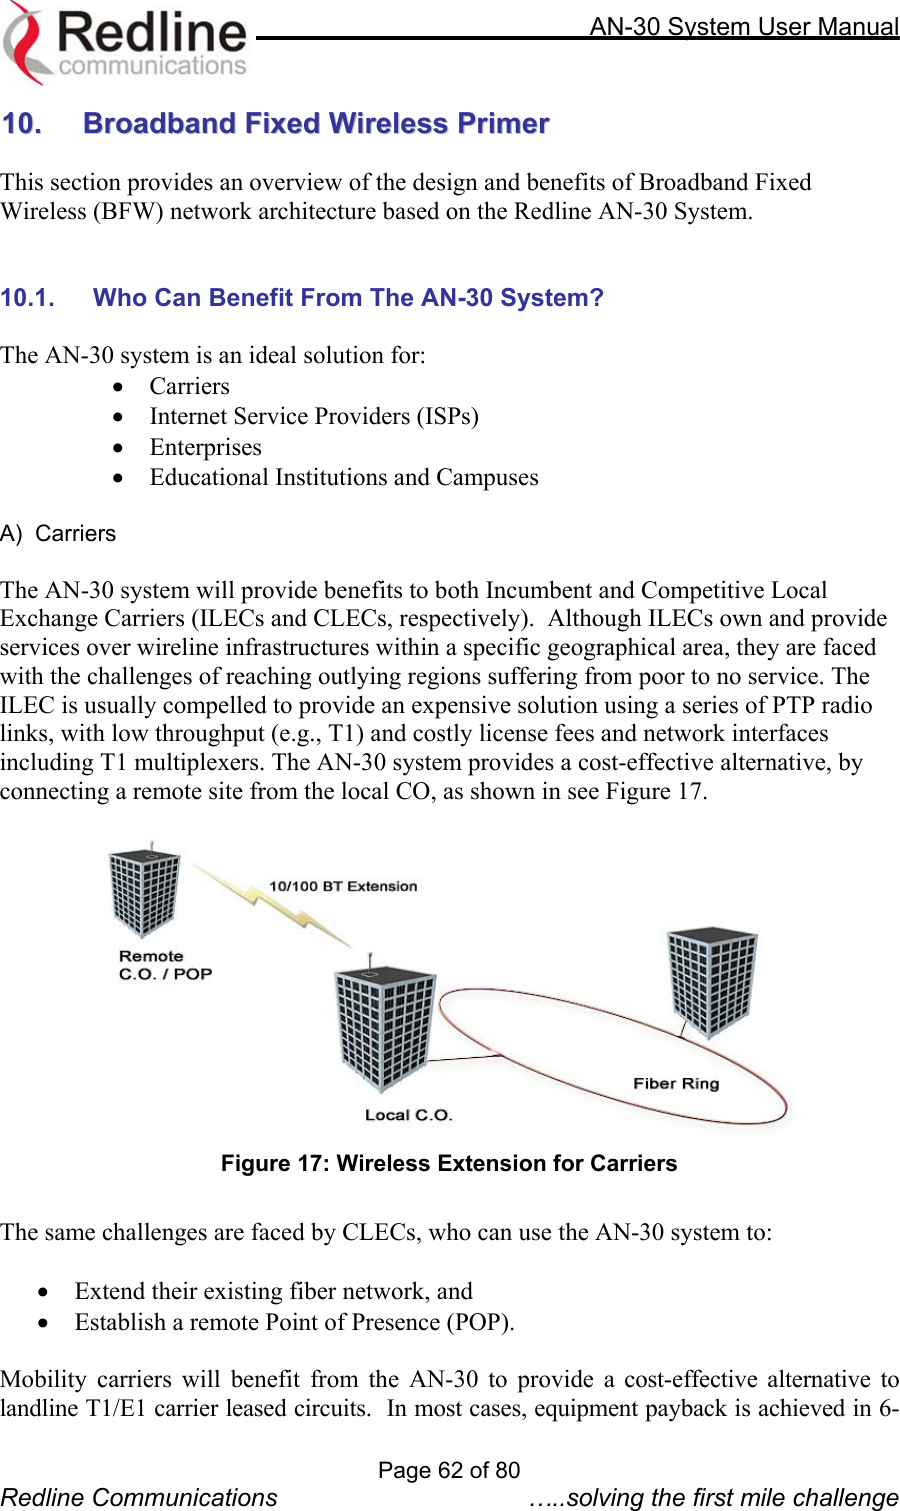     AN-30 System User Manual  1100..    BBrrooaaddbbaanndd  FFiixxeedd  WWiirreelleessss  PPrriimmeerr   This section provides an overview of the design and benefits of Broadband Fixed Wireless (BFW) network architecture based on the Redline AN-30 System.   10.1.  Who Can Benefit From The AN-30 System?  The AN-30 system is an ideal solution for: •  Carriers  •  Internet Service Providers (ISPs) •  Enterprises •  Educational Institutions and Campuses    A)  Carriers  The AN-30 system will provide benefits to both Incumbent and Competitive Local Exchange Carriers (ILECs and CLECs, respectively).  Although ILECs own and provide services over wireline infrastructures within a specific geographical area, they are faced with the challenges of reaching outlying regions suffering from poor to no service. The ILEC is usually compelled to provide an expensive solution using a series of PTP radio links, with low throughput (e.g., T1) and costly license fees and network interfaces including T1 multiplexers. The AN-30 system provides a cost-effective alternative, by connecting a remote site from the local CO, as shown in see Figure 17.     Figure 17: Wireless Extension for Carriers  The same challenges are faced by CLECs, who can use the AN-30 system to:   •  Extend their existing fiber network, and  •  Establish a remote Point of Presence (POP).     Mobility carriers will benefit from the AN-30 to provide a cost-effective alternative to landline T1/E1 carrier leased circuits.  In most cases, equipment payback is achieved in 6-Page 62 of 80 Redline Communications  …..solving the first mile challenge 